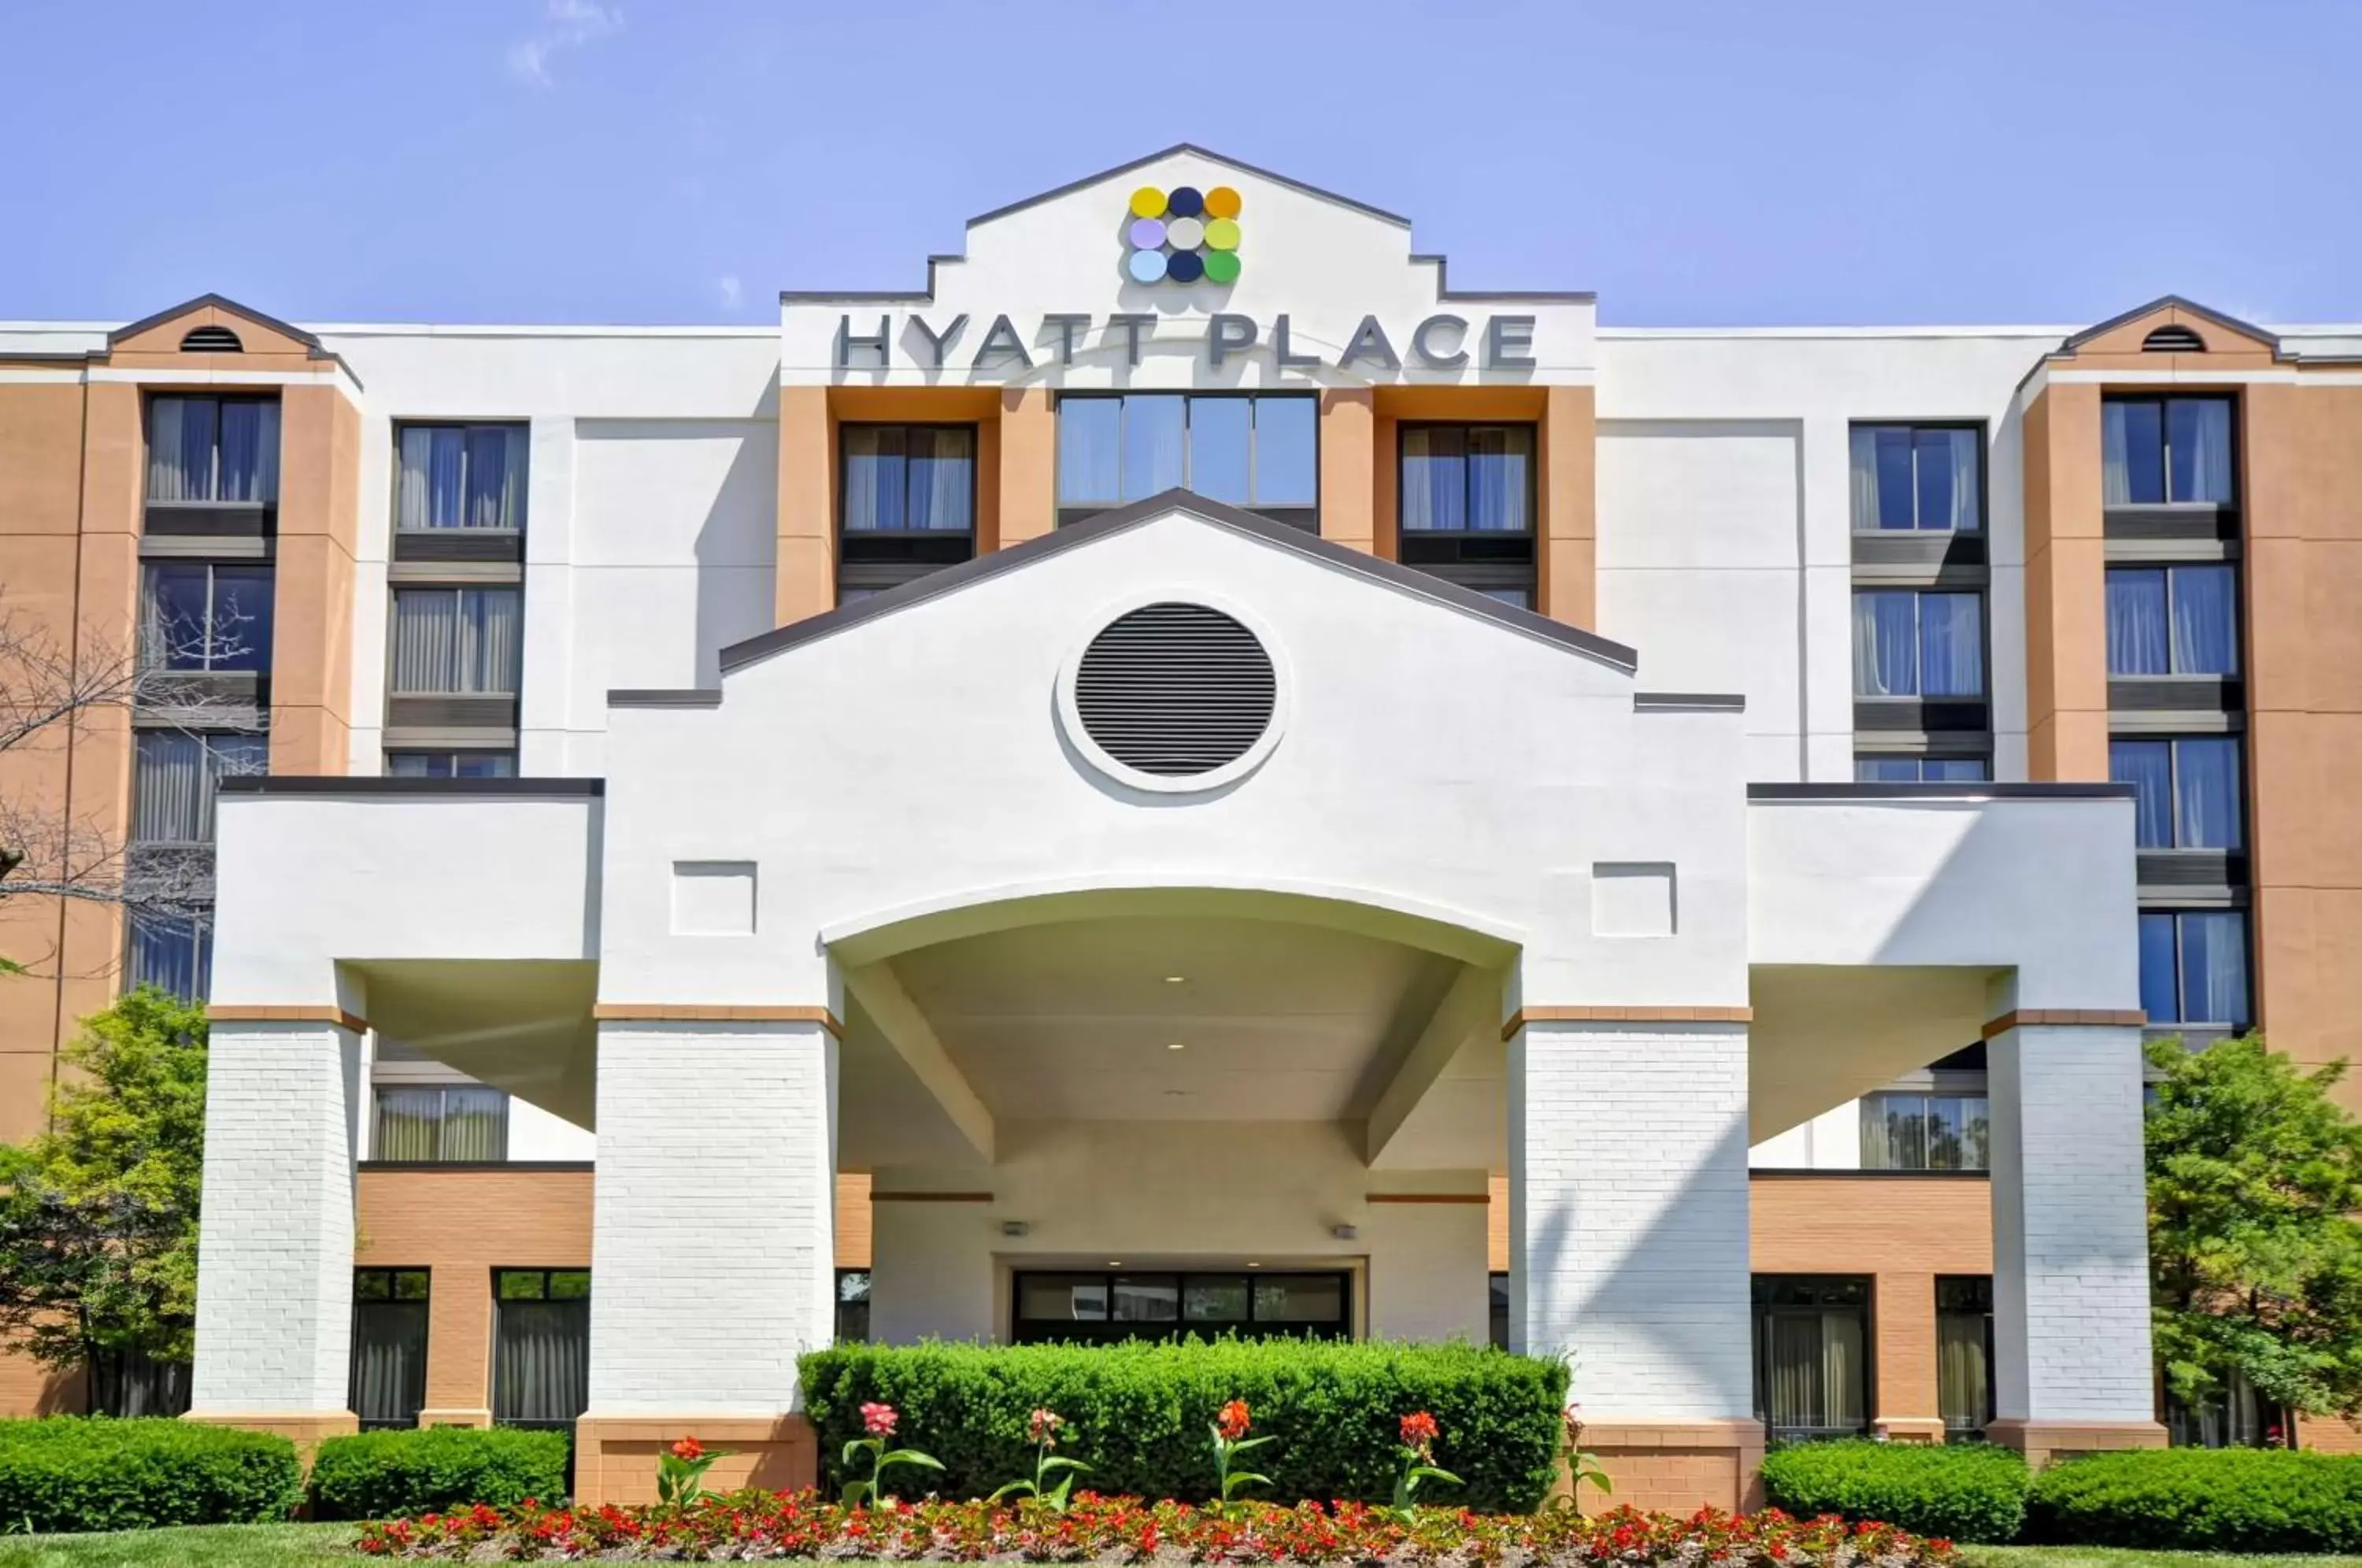 Property Building in Hyatt Place Orlando Airport